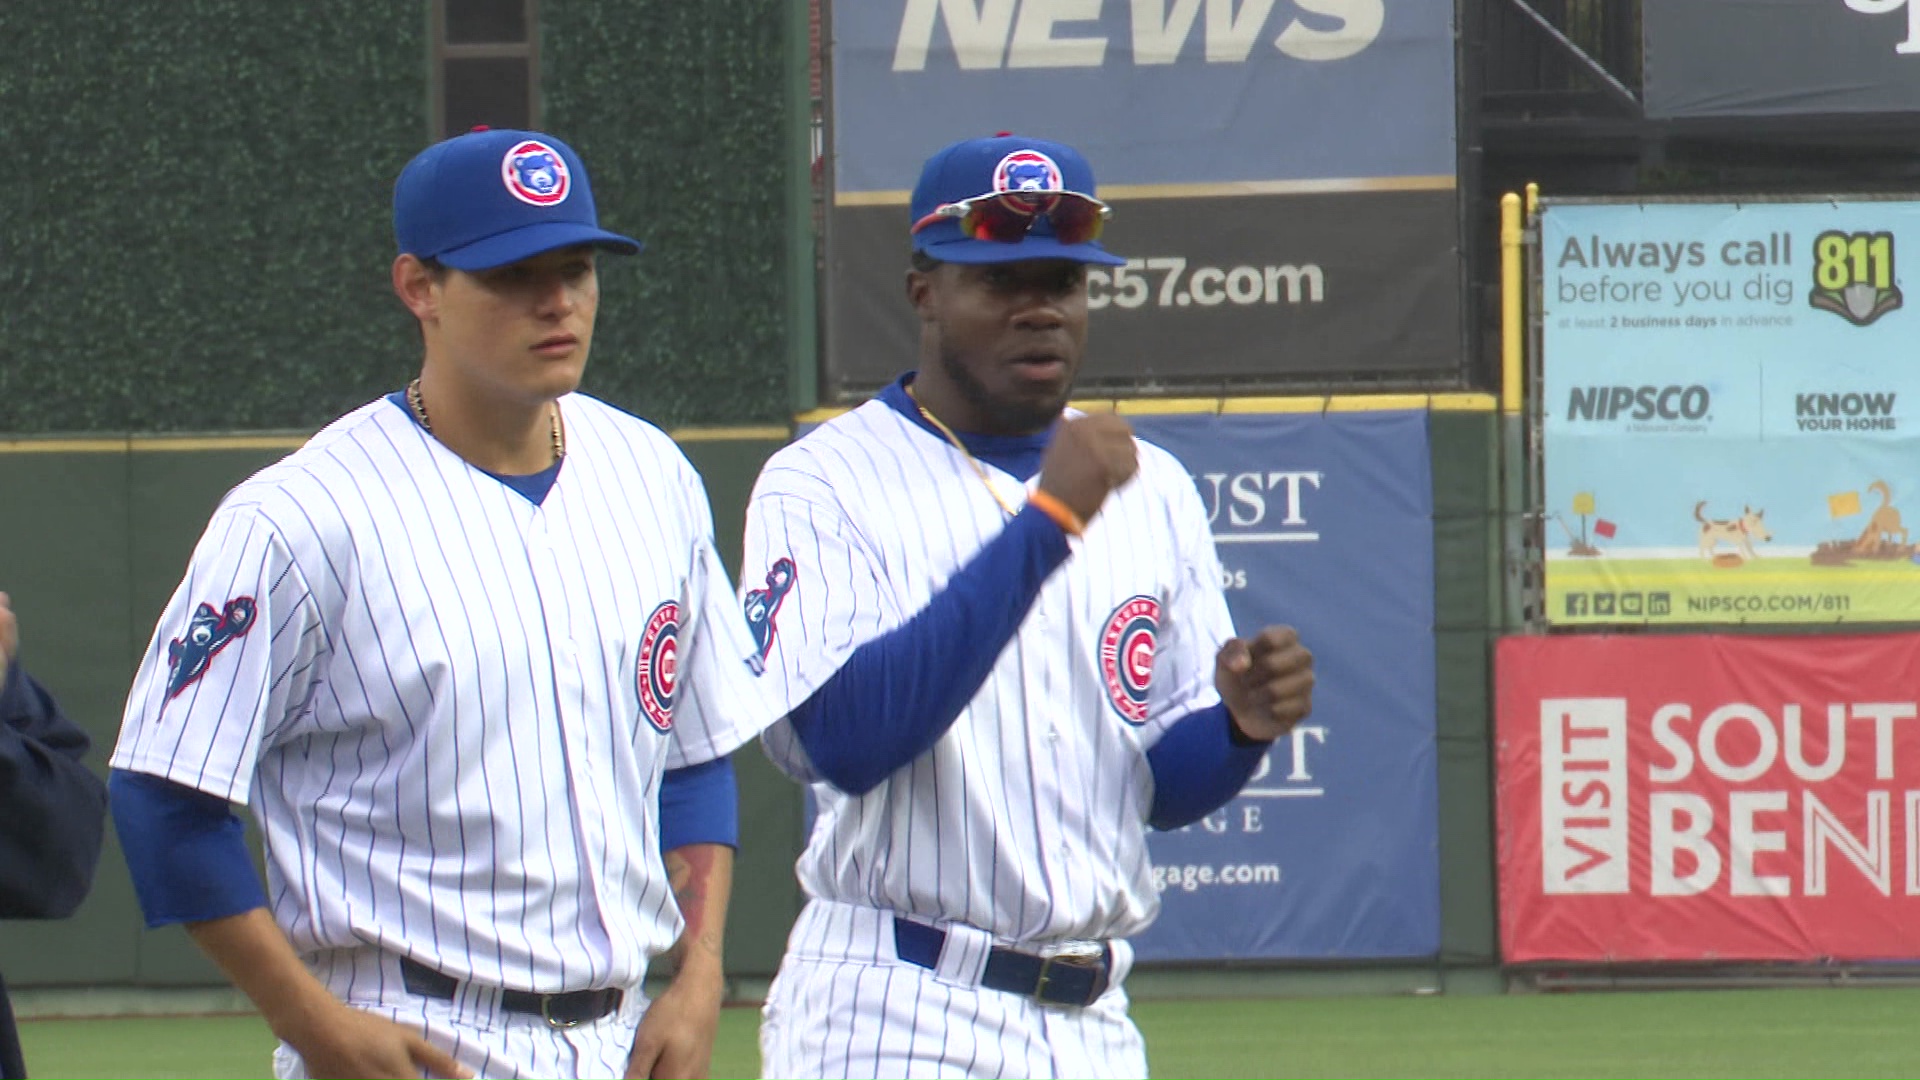 South Bend Cubs beat Hot Rods, advance to division championship